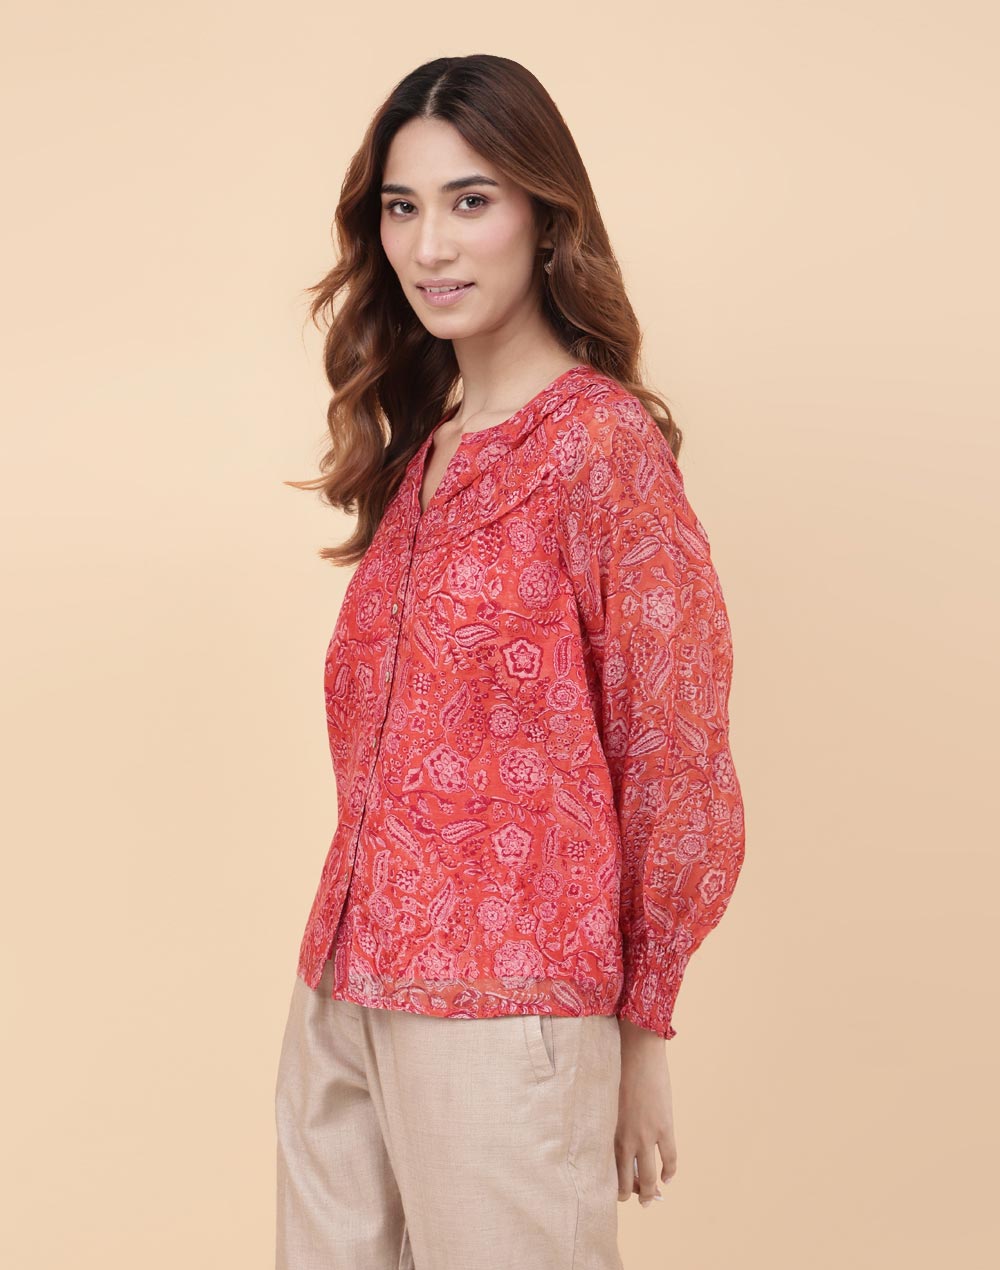 Buy Red Cotton Silk Hand Block Printed Top for Women Online at Fabindia ...